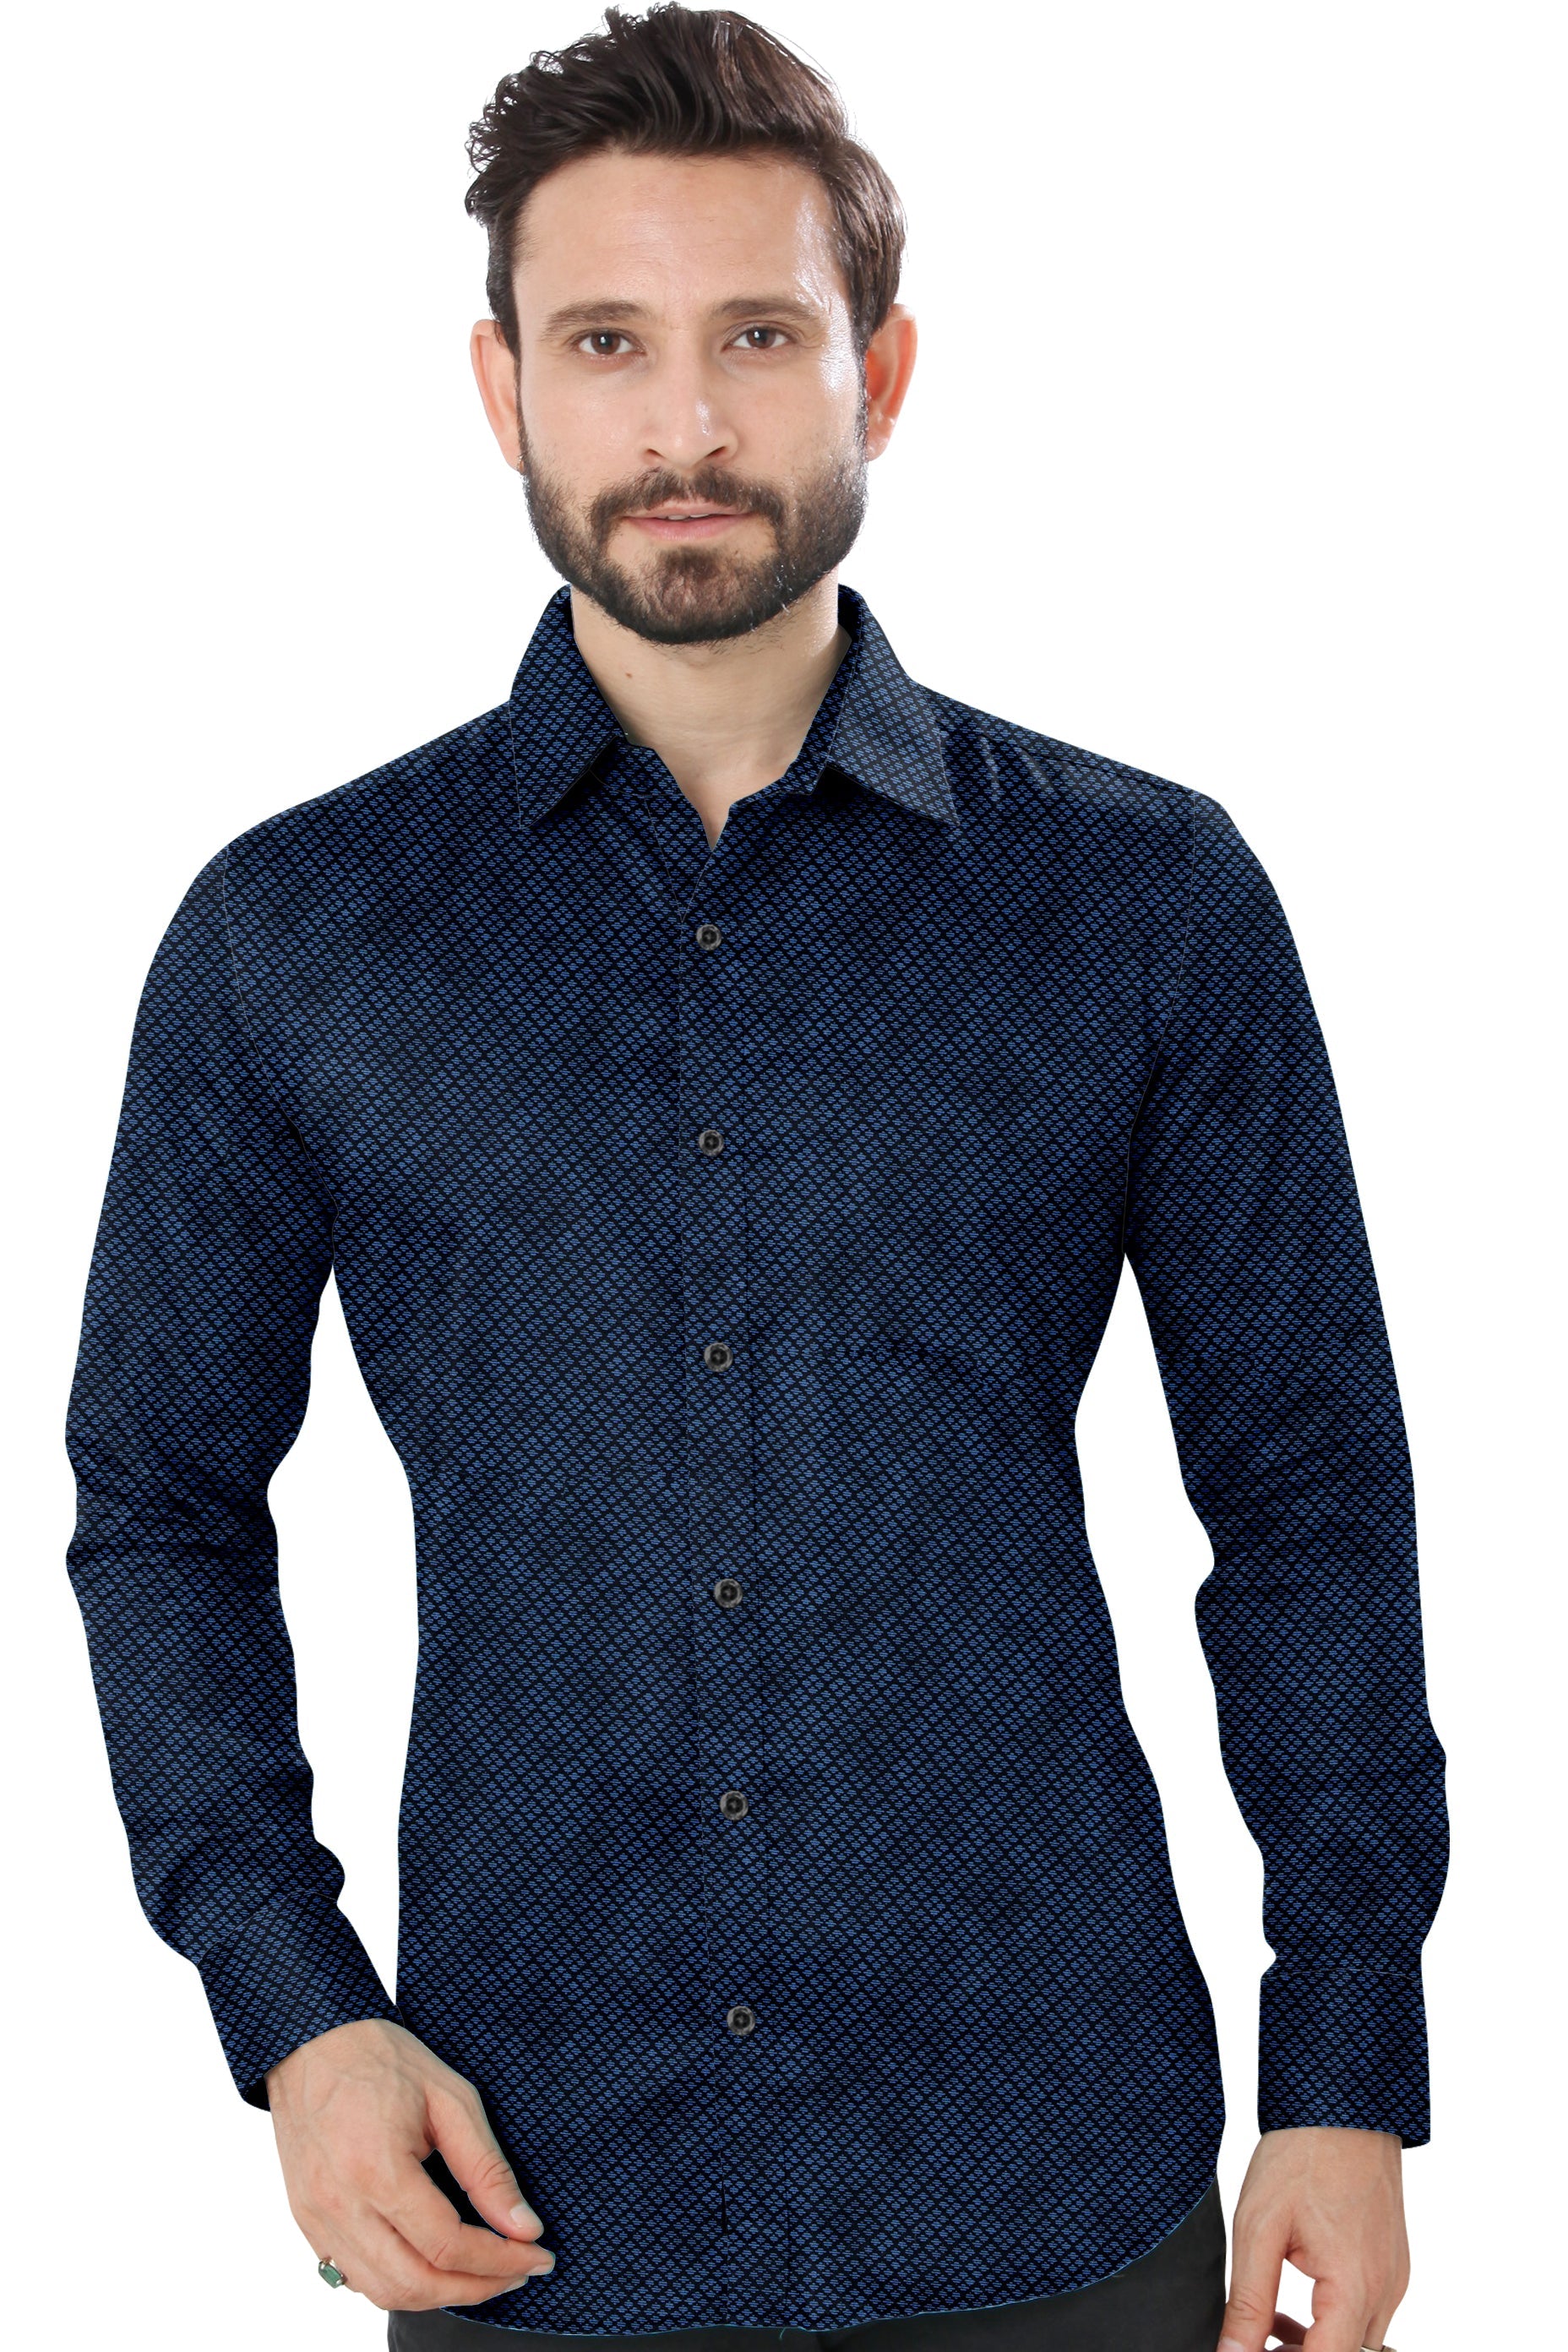 Men's Blue Checked Casual Shirt Full Sleeves 100% Cotton 